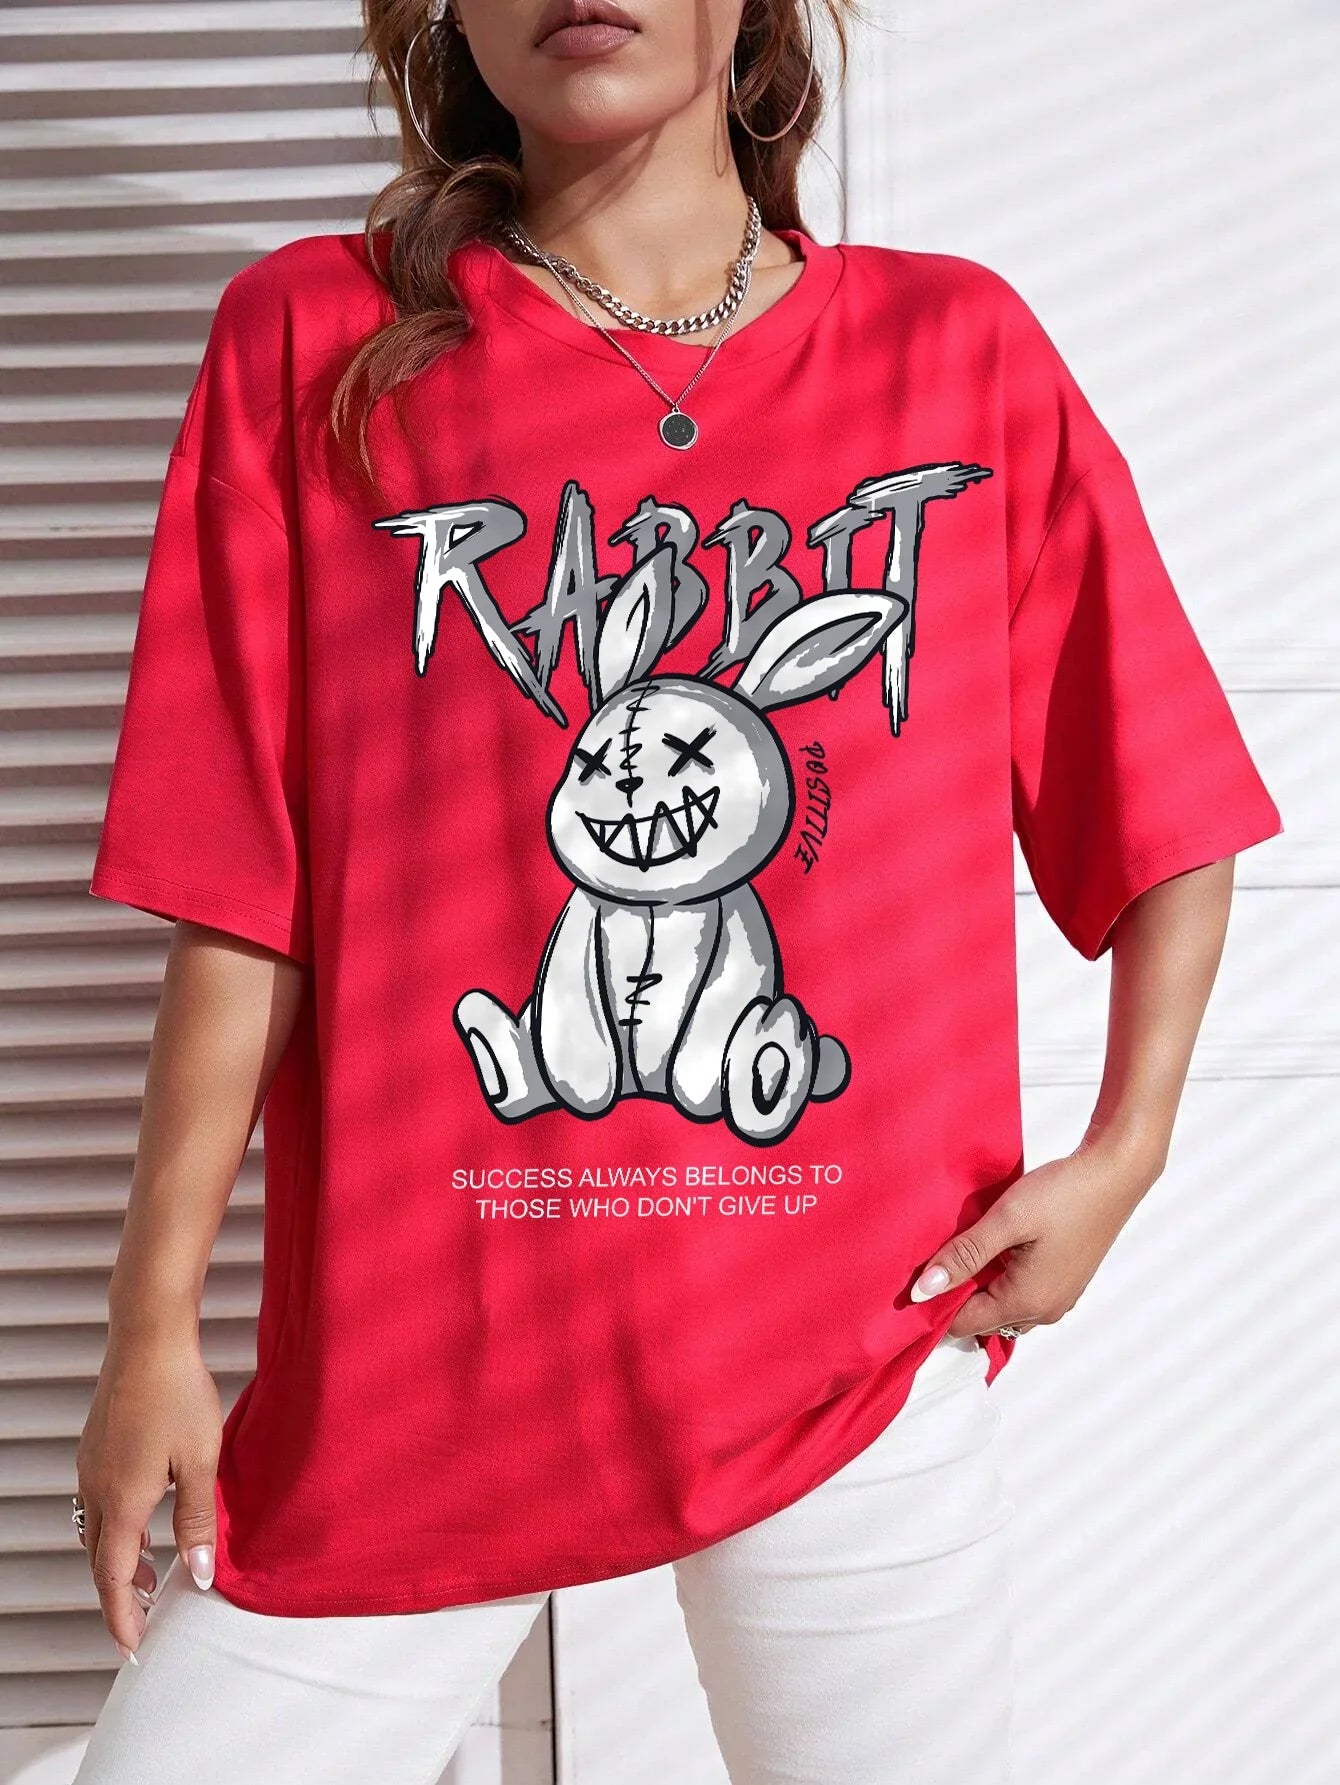 Gritty Graffiti Bunny Oversized Tee – Motivational Street Style Top - Red / XXL - T-Shirts - Shirts & Tops - 8 - 2024